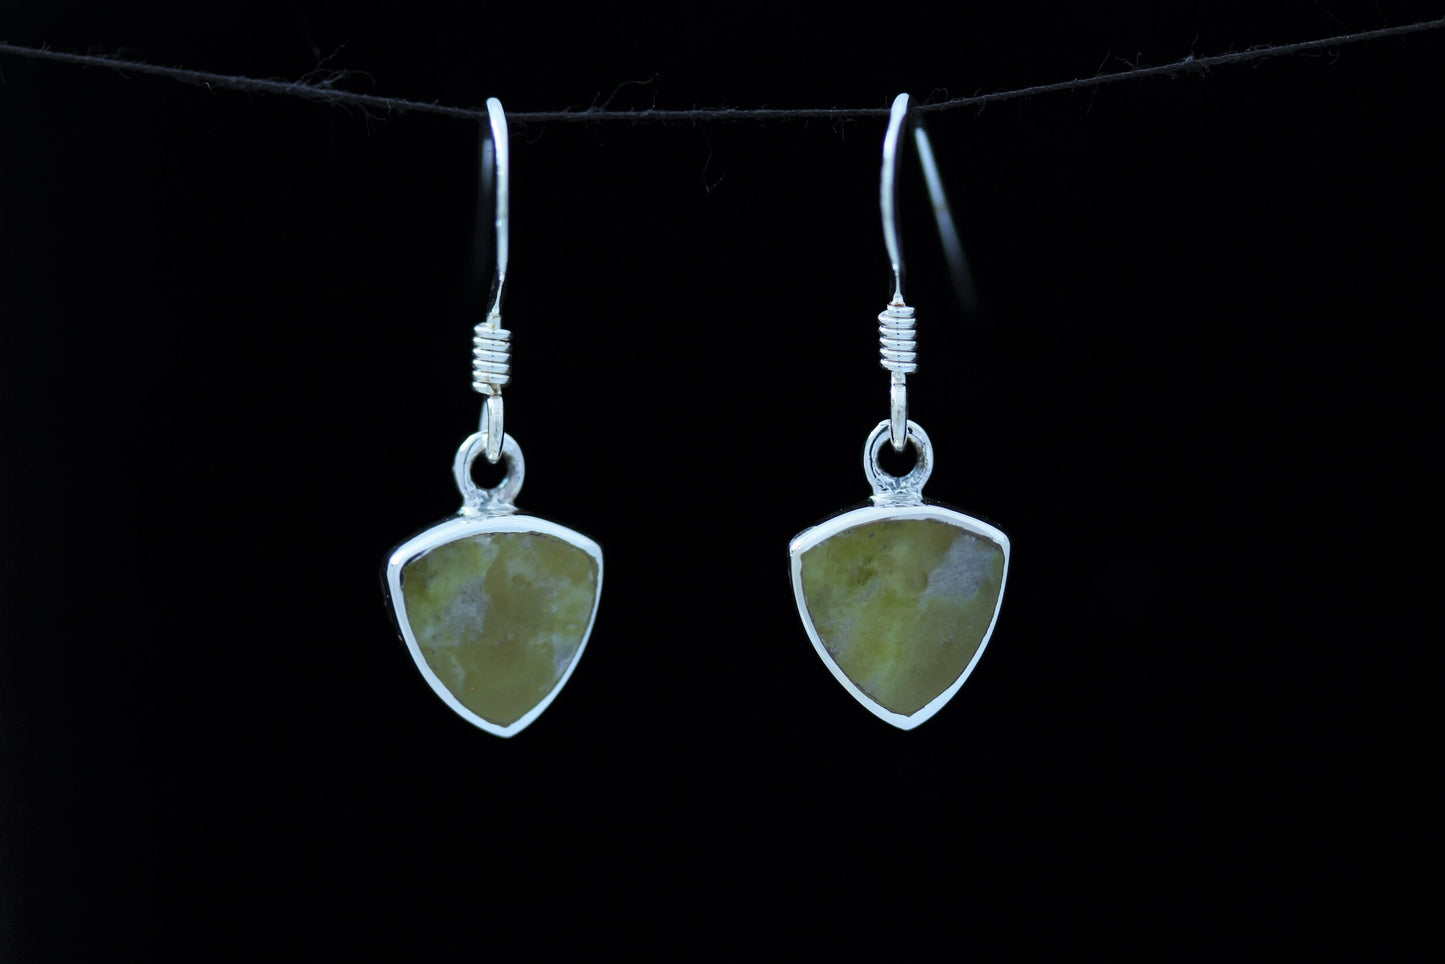 Scottish Marble Earrings - Small Shield